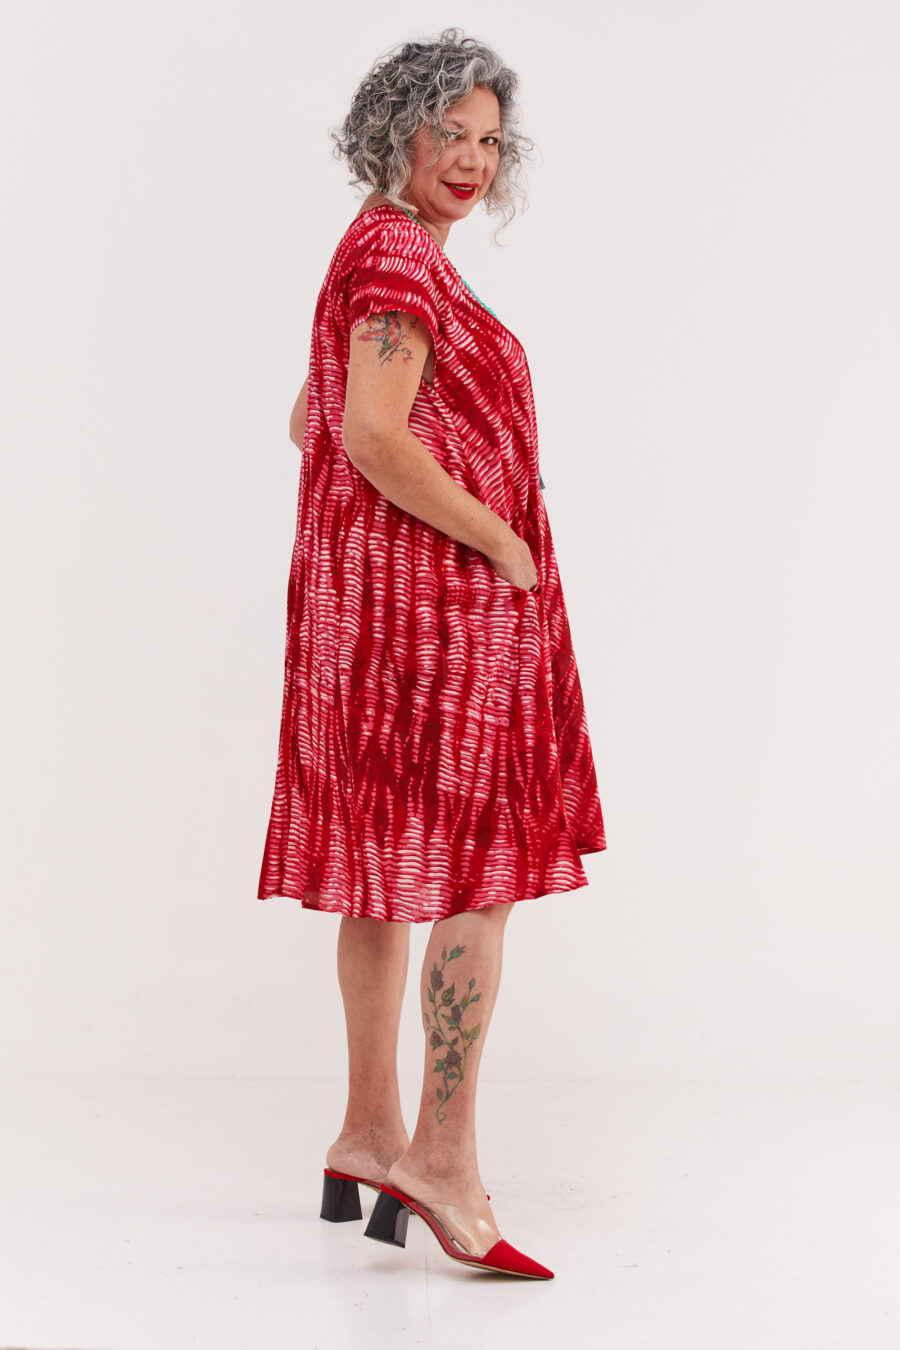 Joes dress | Uniquely designed midi oversize dress - Stone red print, pink dress with red stone-like print by comfort zone boutique